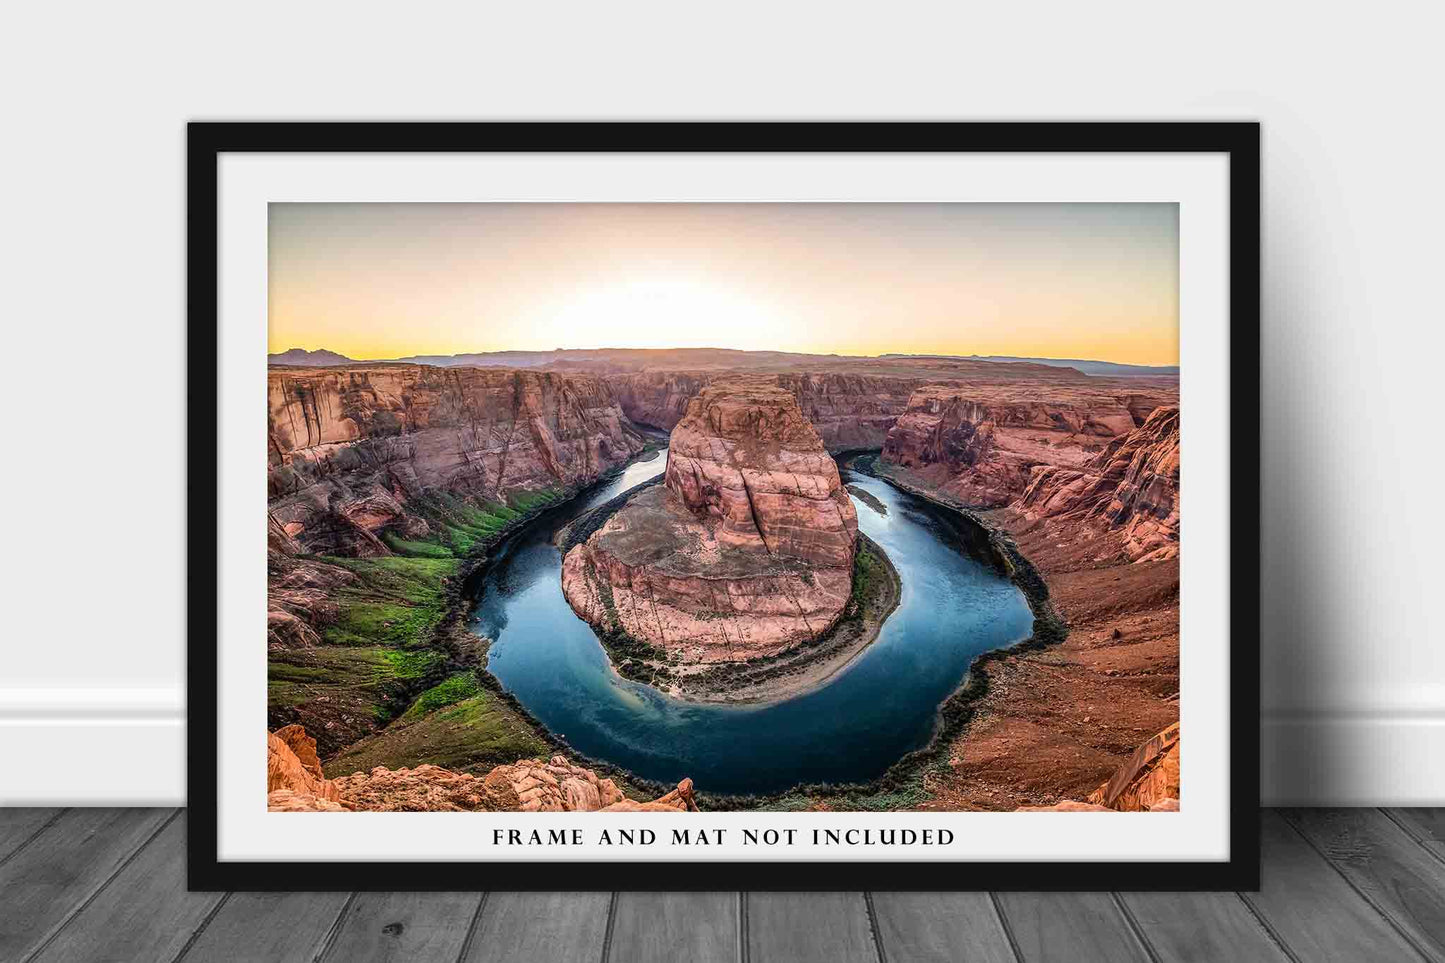 Western Photography Print (Not Framed) Picture of Horseshoe Bend at Sunset in Arizona Colorado River Wall Art Southwestern Decor